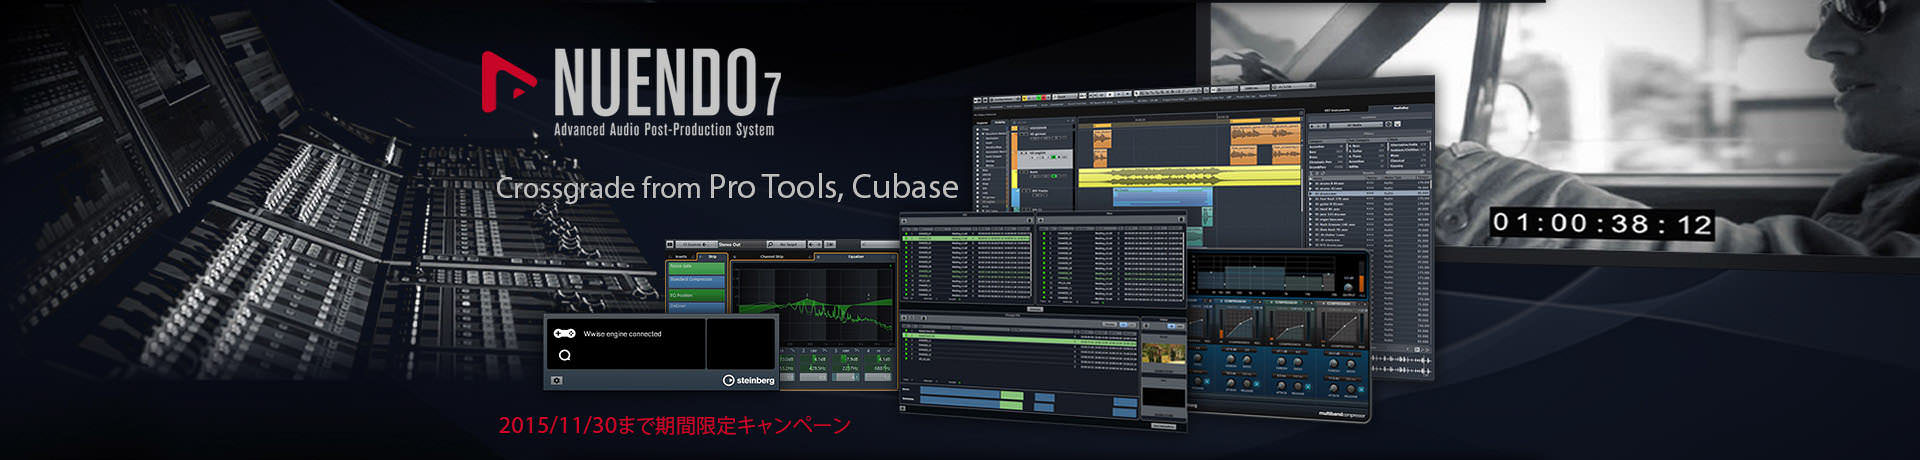 Steinberg Crossgrade from Pro Tools Campaign